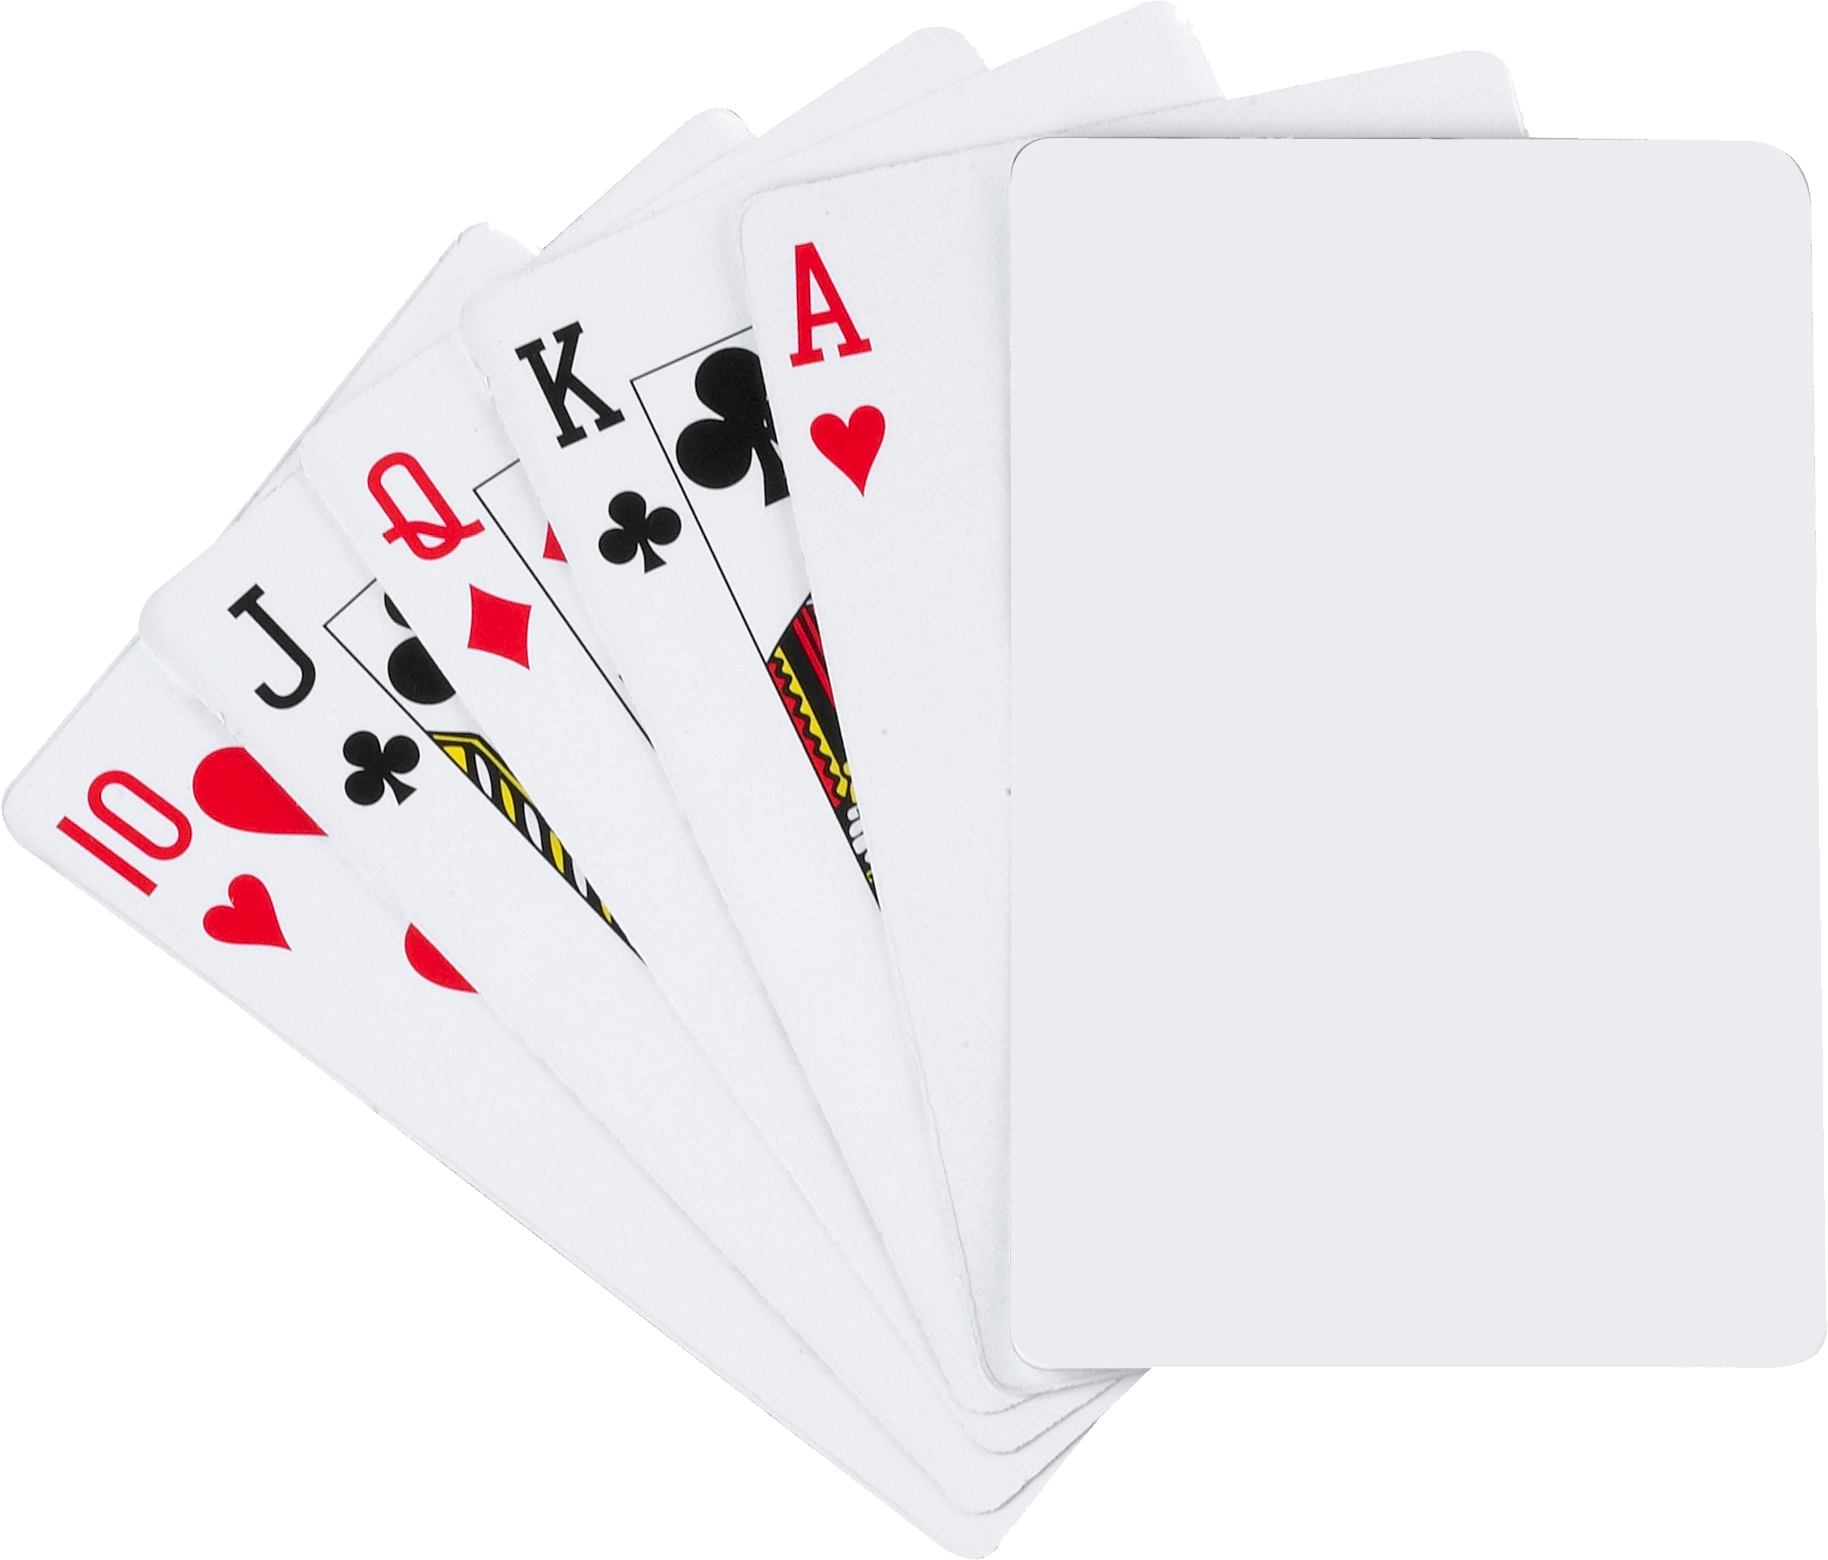 Ace playing card PNG download grátis